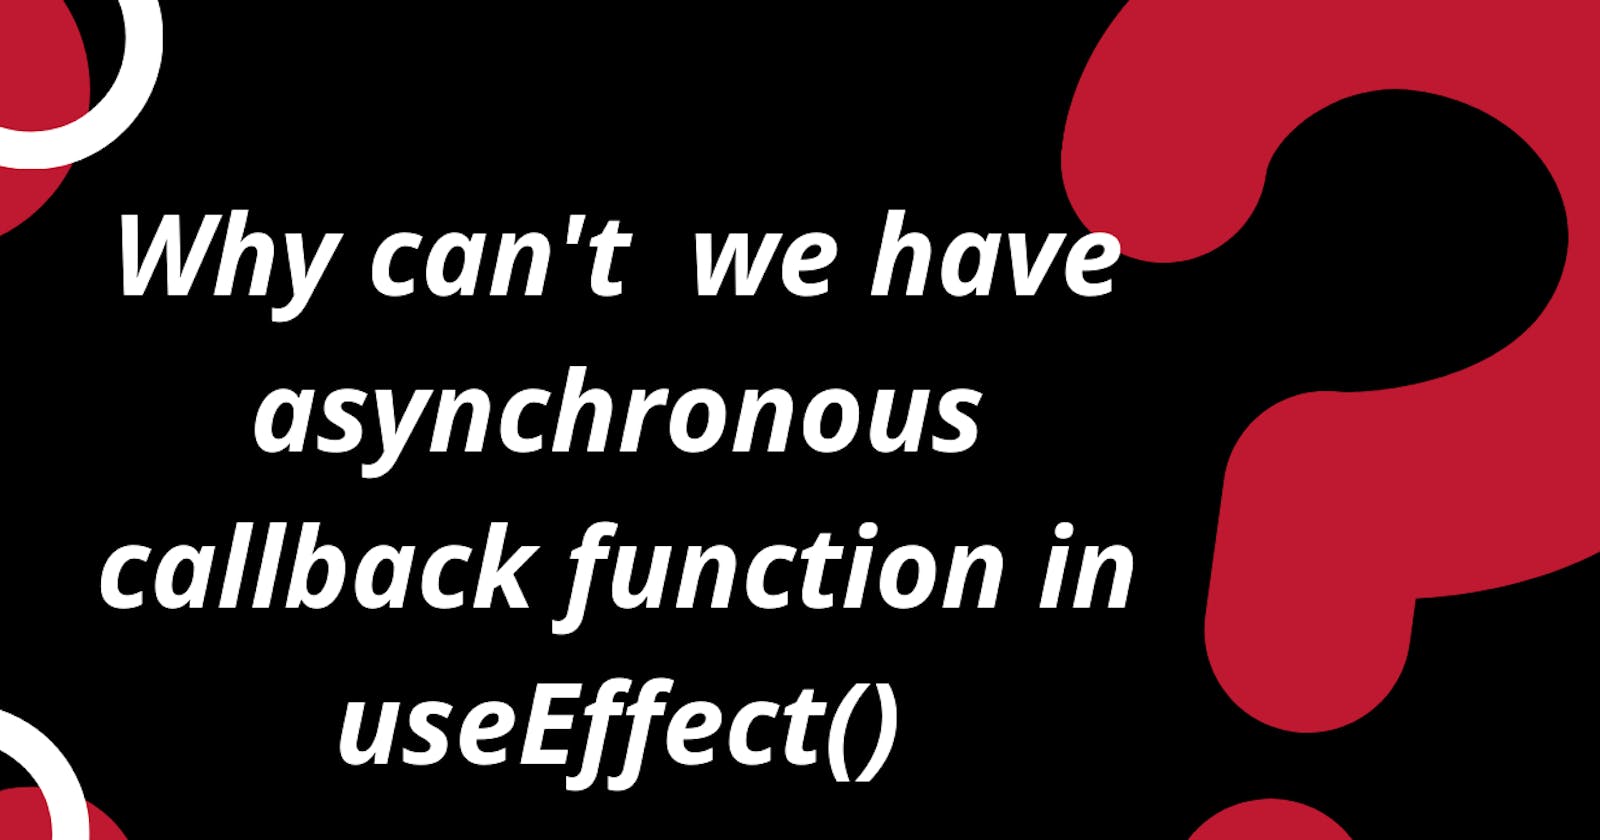 Why can't  we have asynchronous callback function 
                                                     in useEffect()